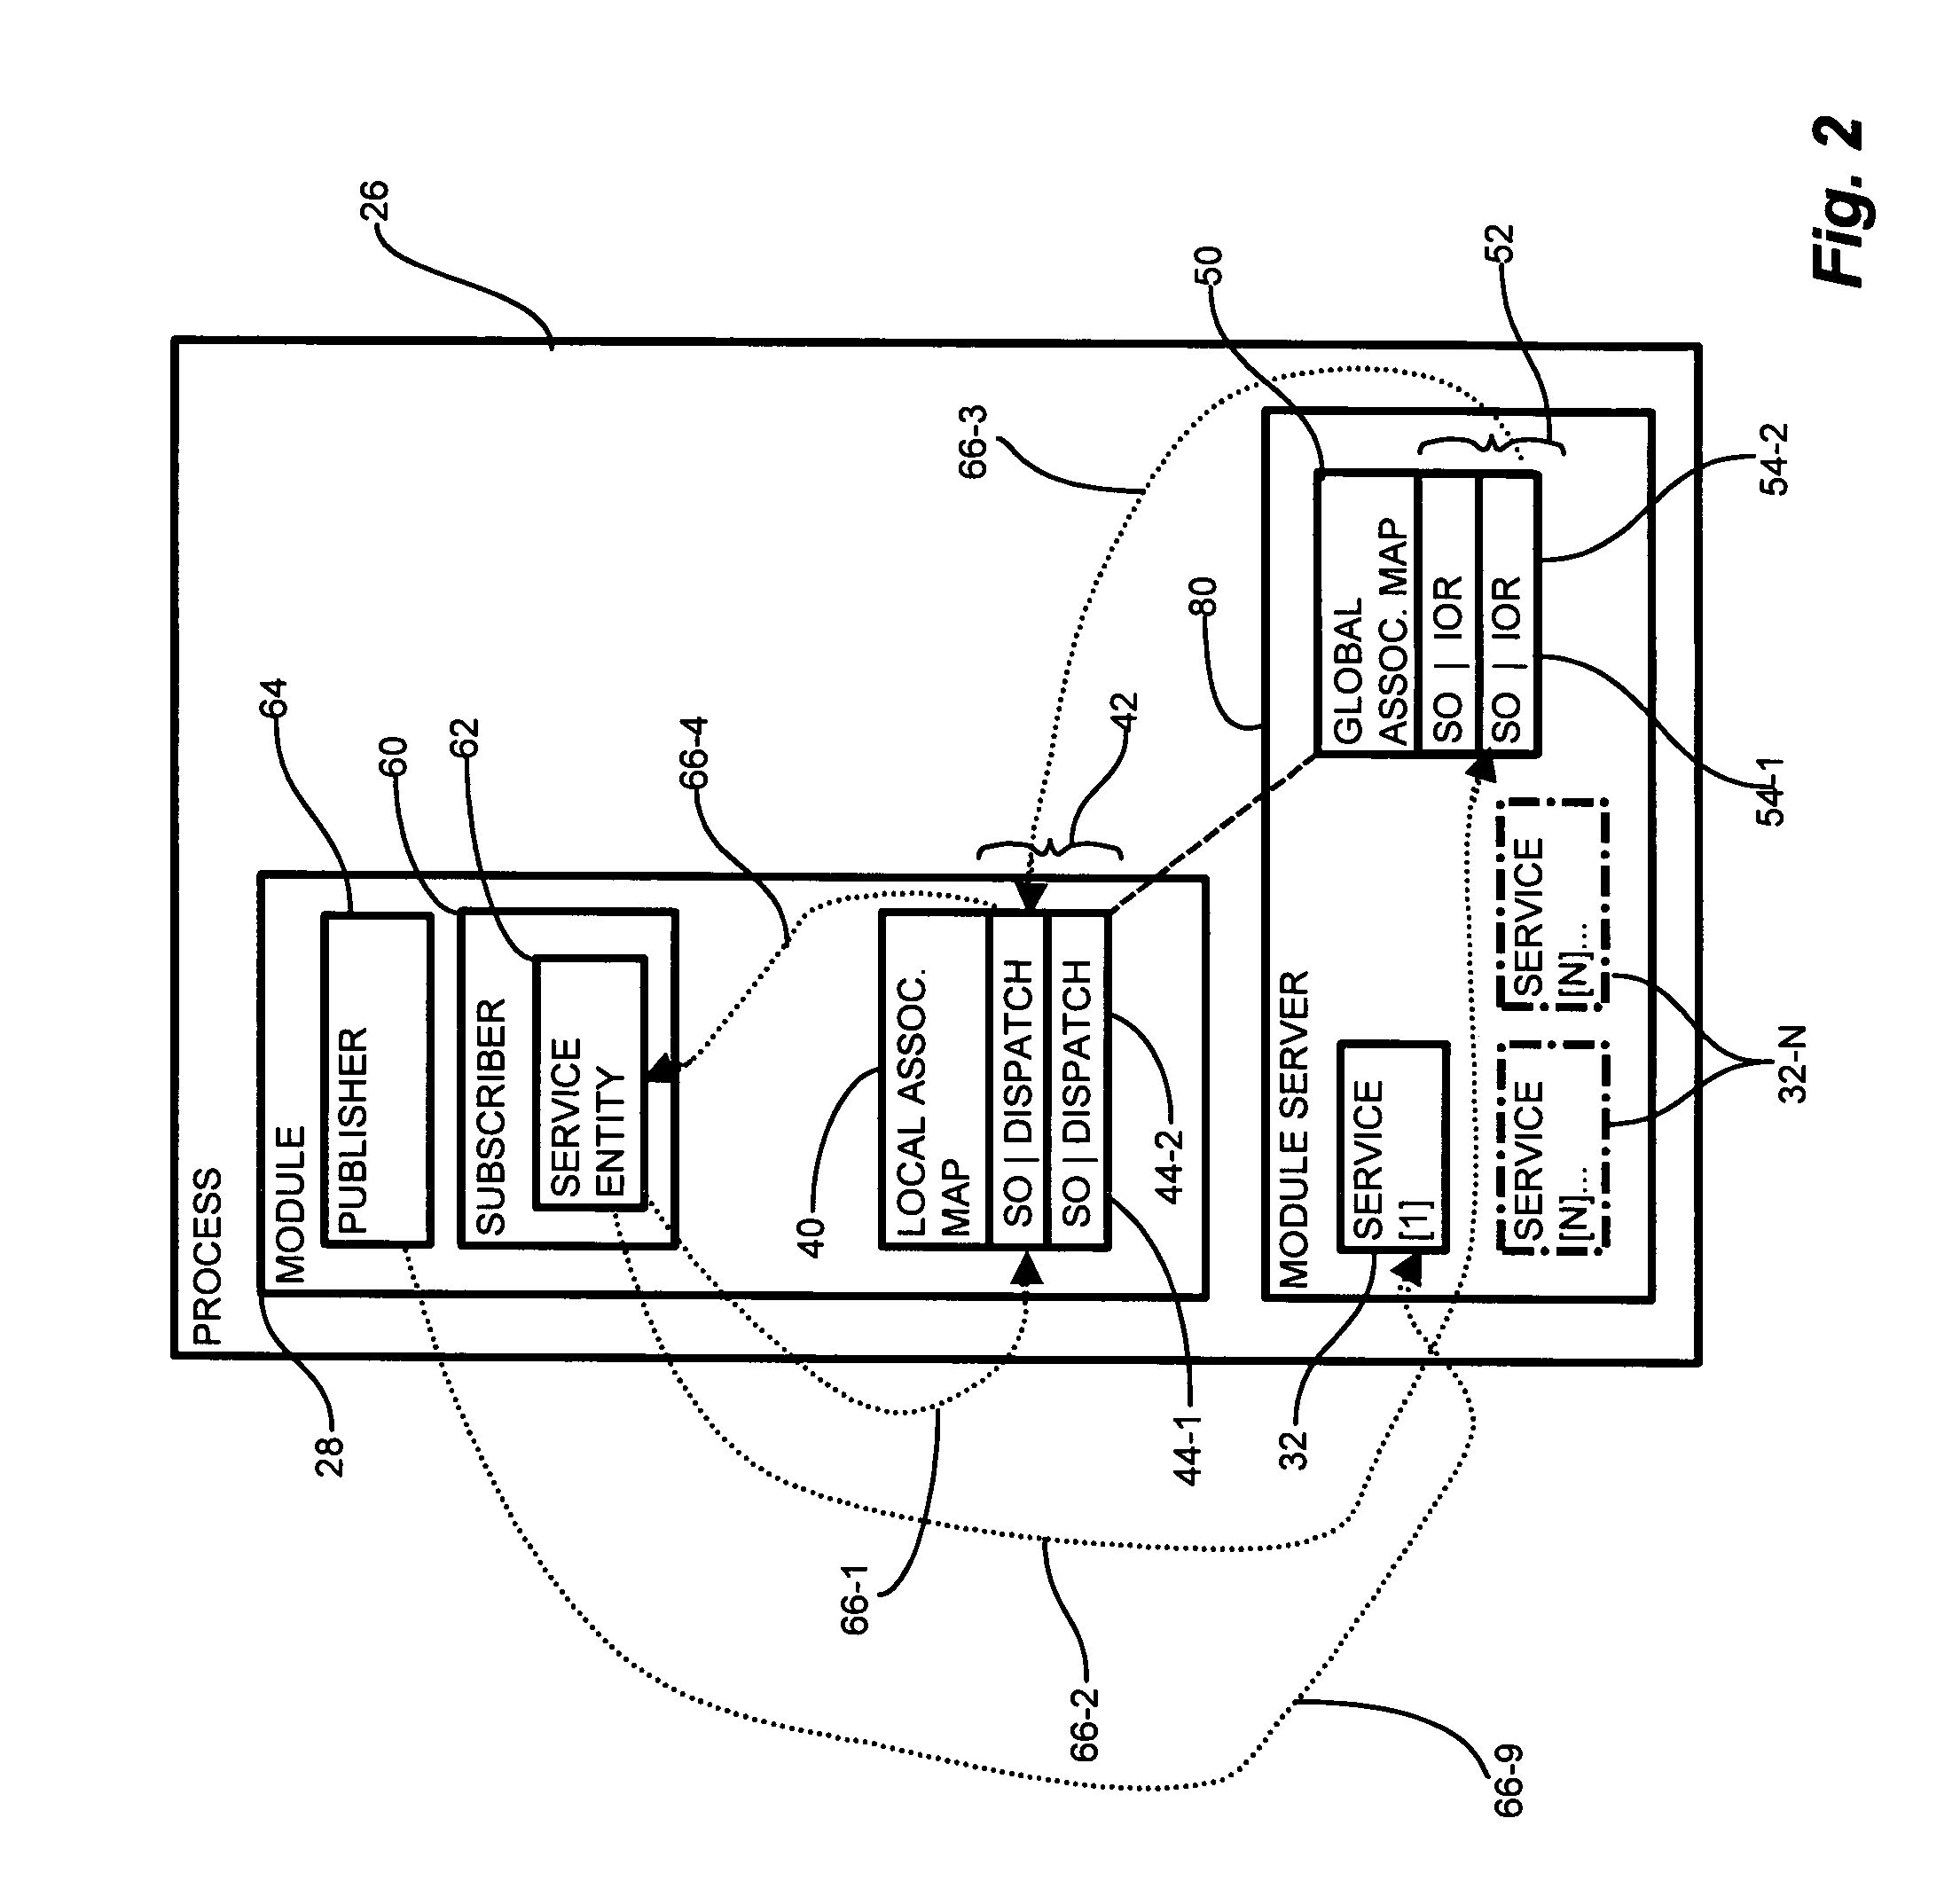 Methods and apparatus for providing extensible lightweight services in a data storage environment